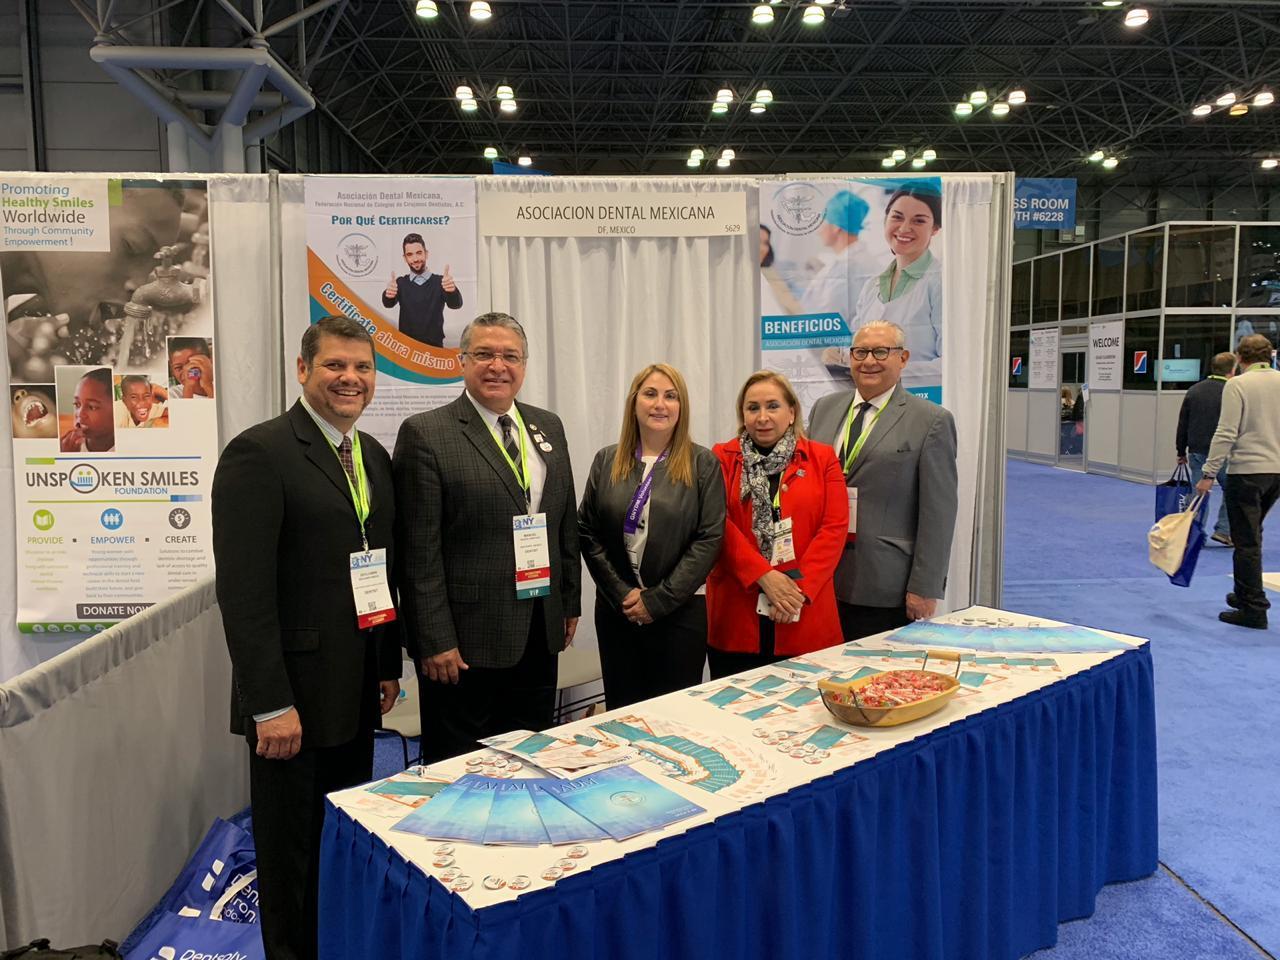 Stand Greater New York Dental Meeting 2018.